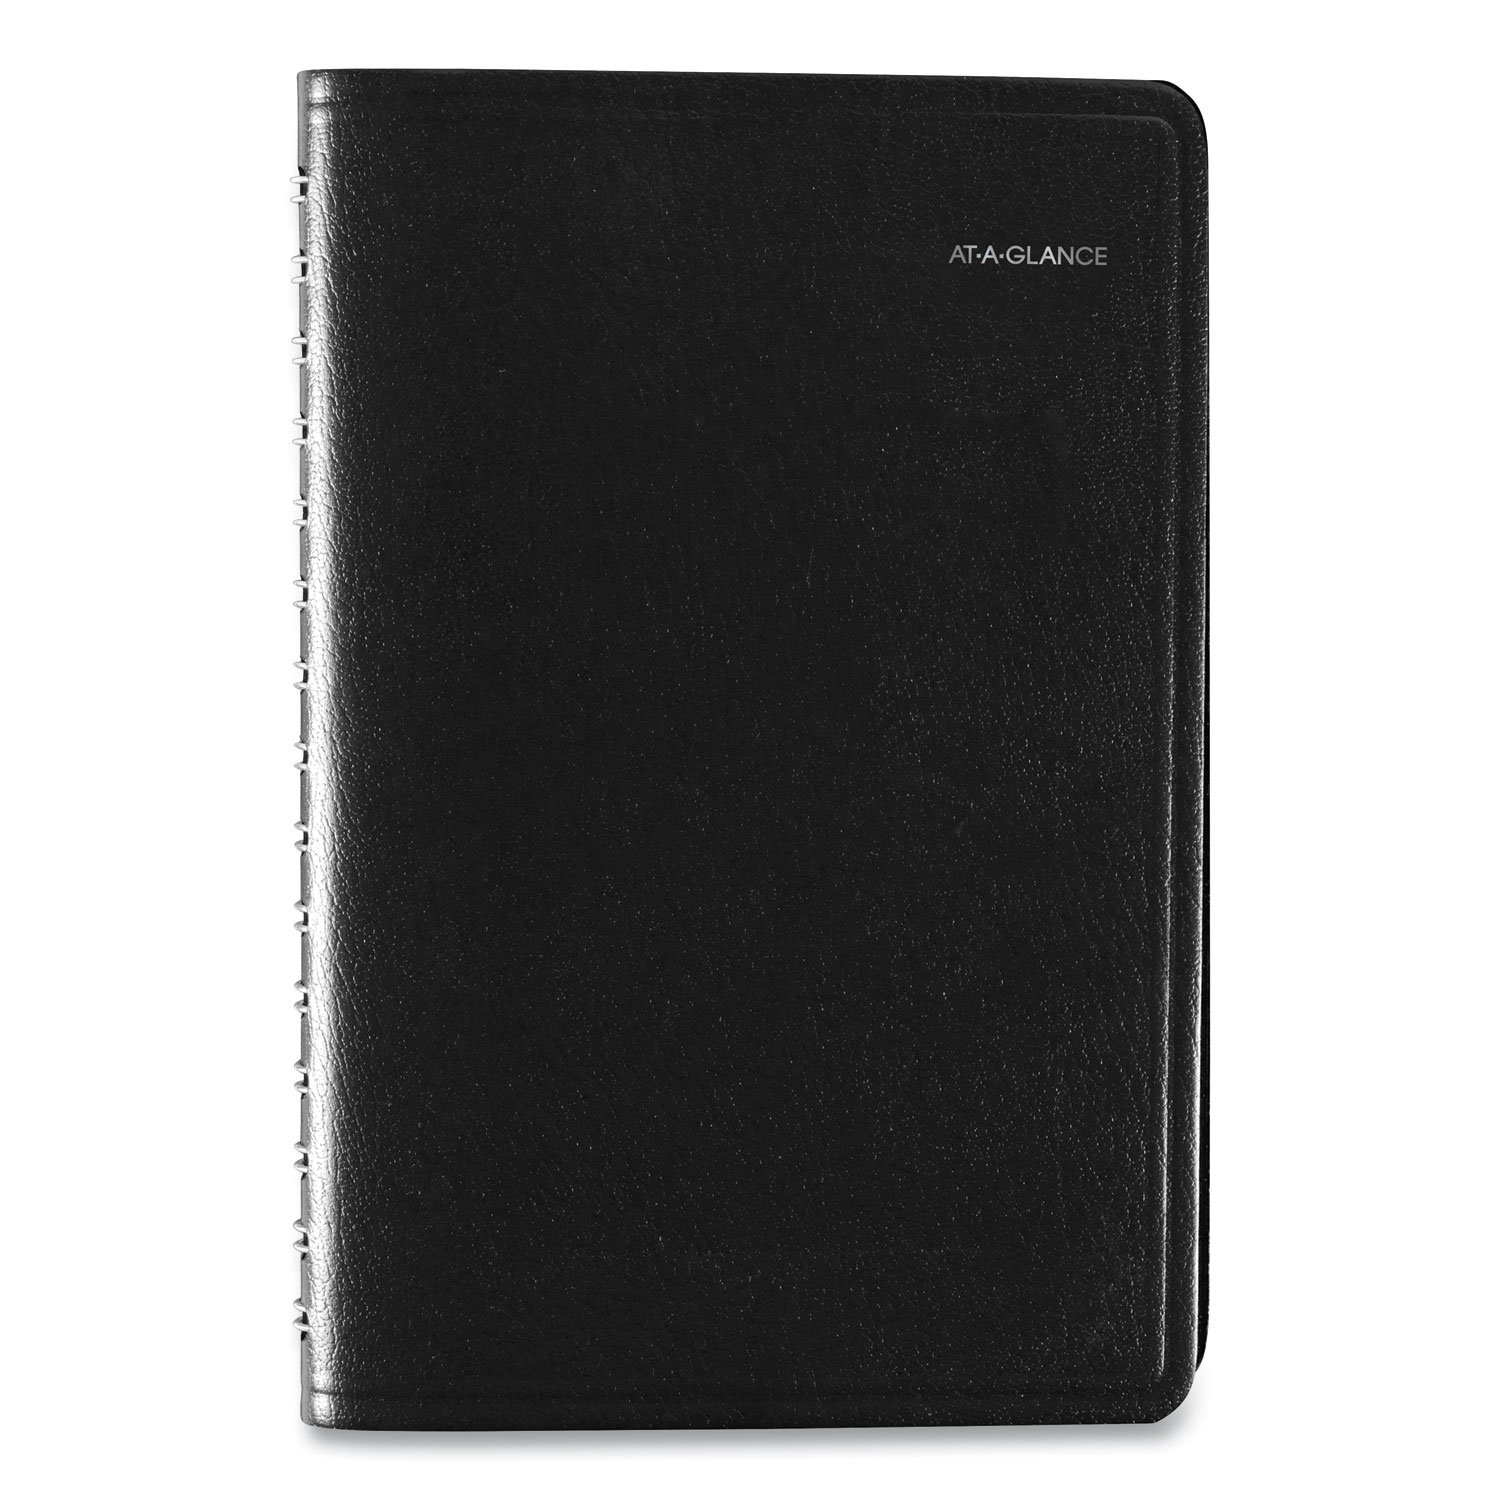  AT-A-GLANCE G100-00 Daily Appointment Book with15-Minute Appointments, 8 x 4 7/8, Black, 2020 (AAGG10000) 